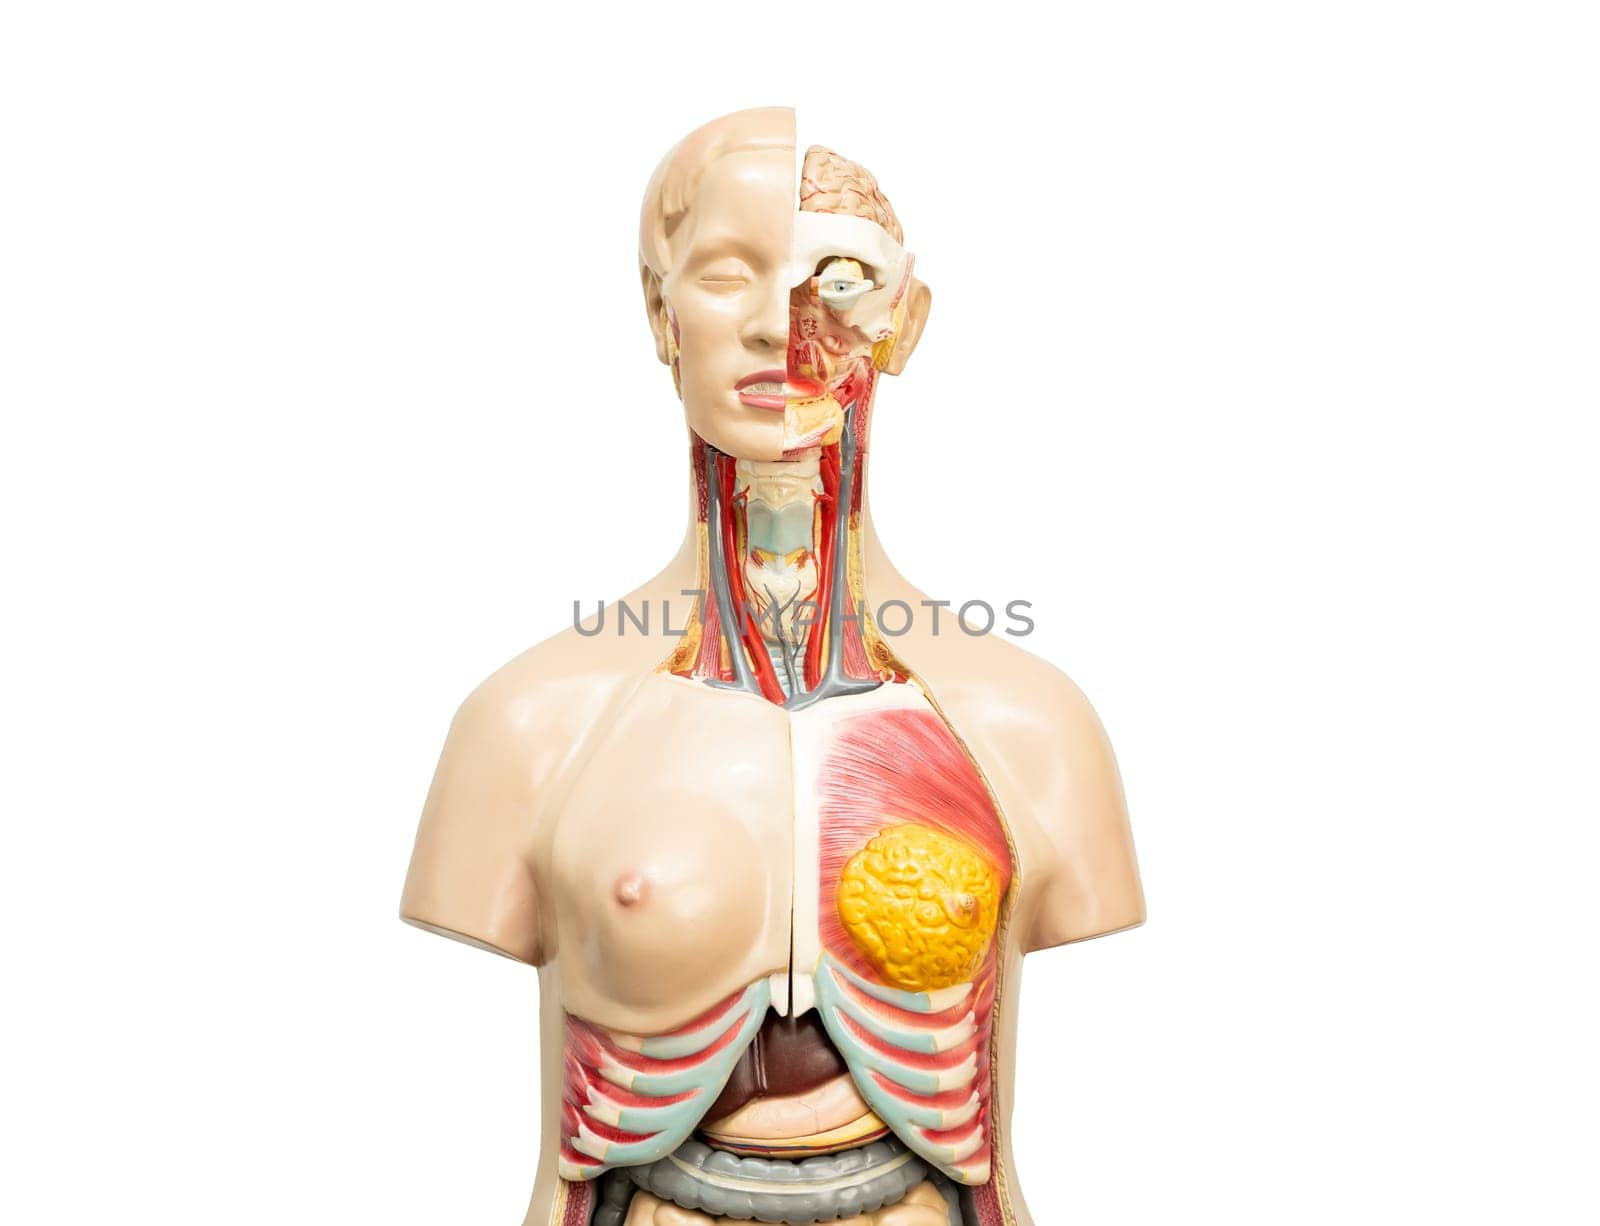 Human model anatomy for medical training course, teaching medicine education isolated on white background with clipping path. by pamai